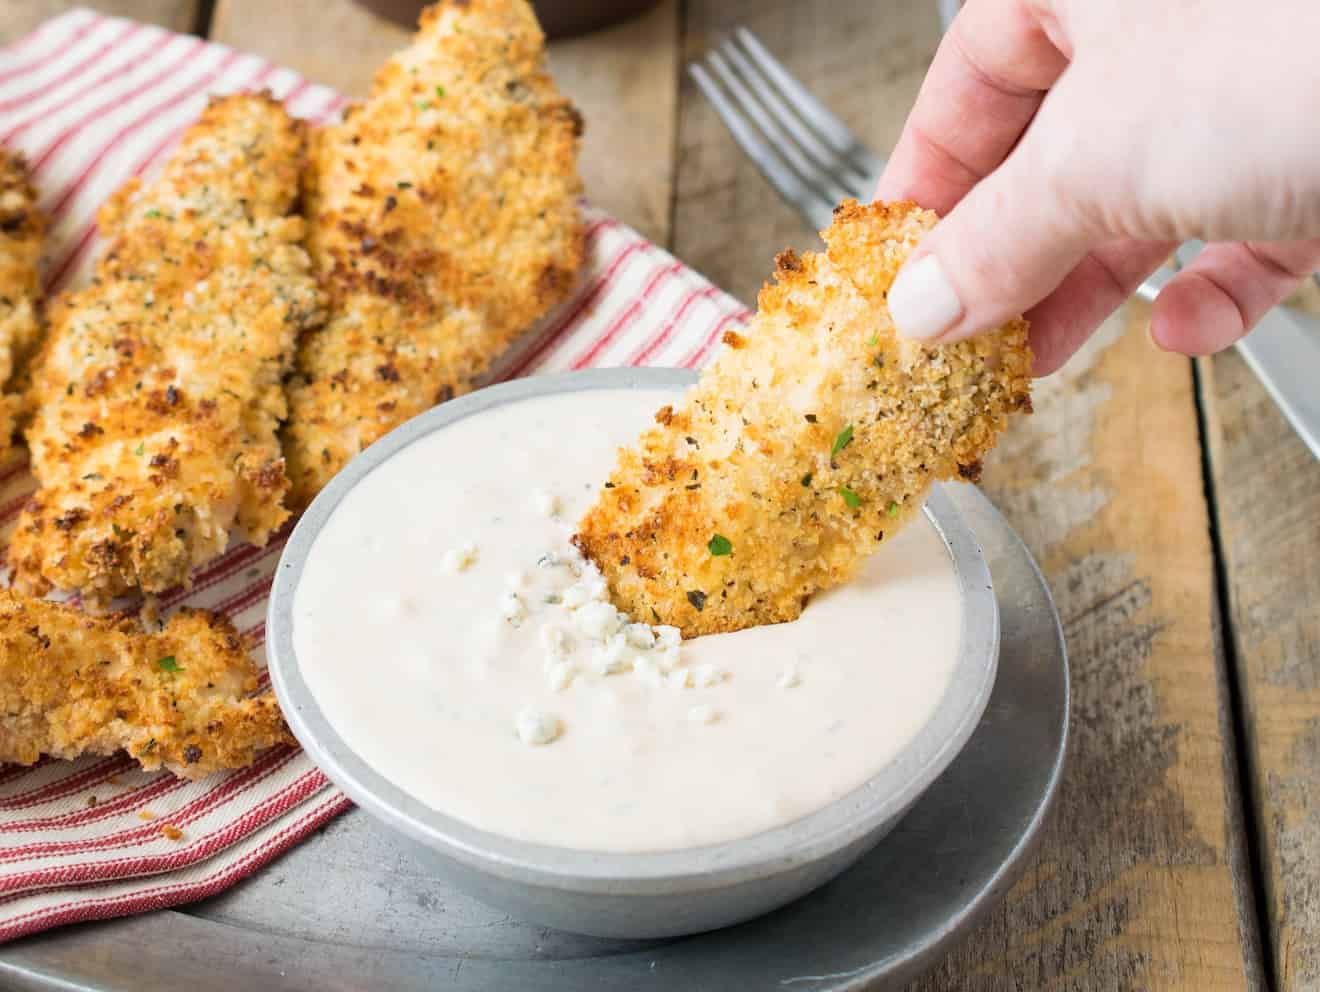 A crispy Panko breaded chicken tender served with a spicy blue cheese sauce